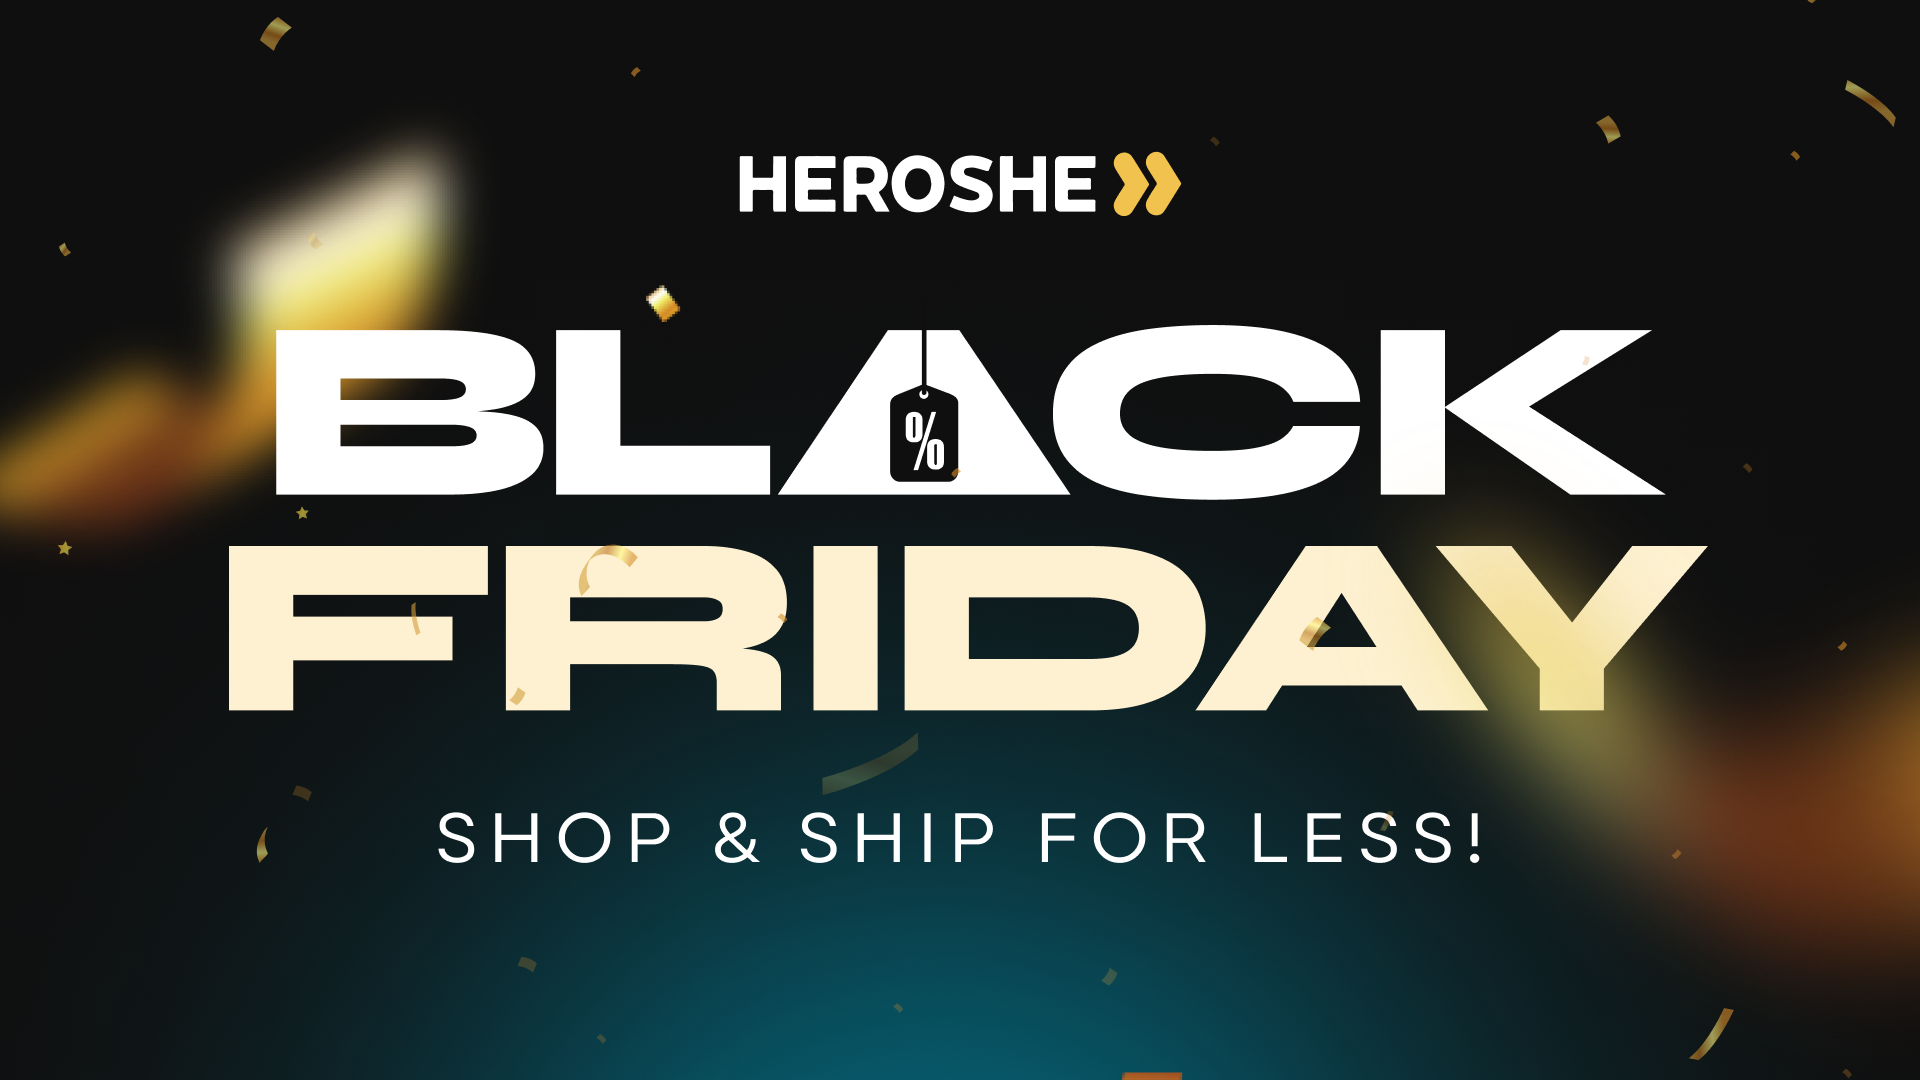 Enjoy Mega Black Friday Discounts on Shipping and Home Delivery Fees!